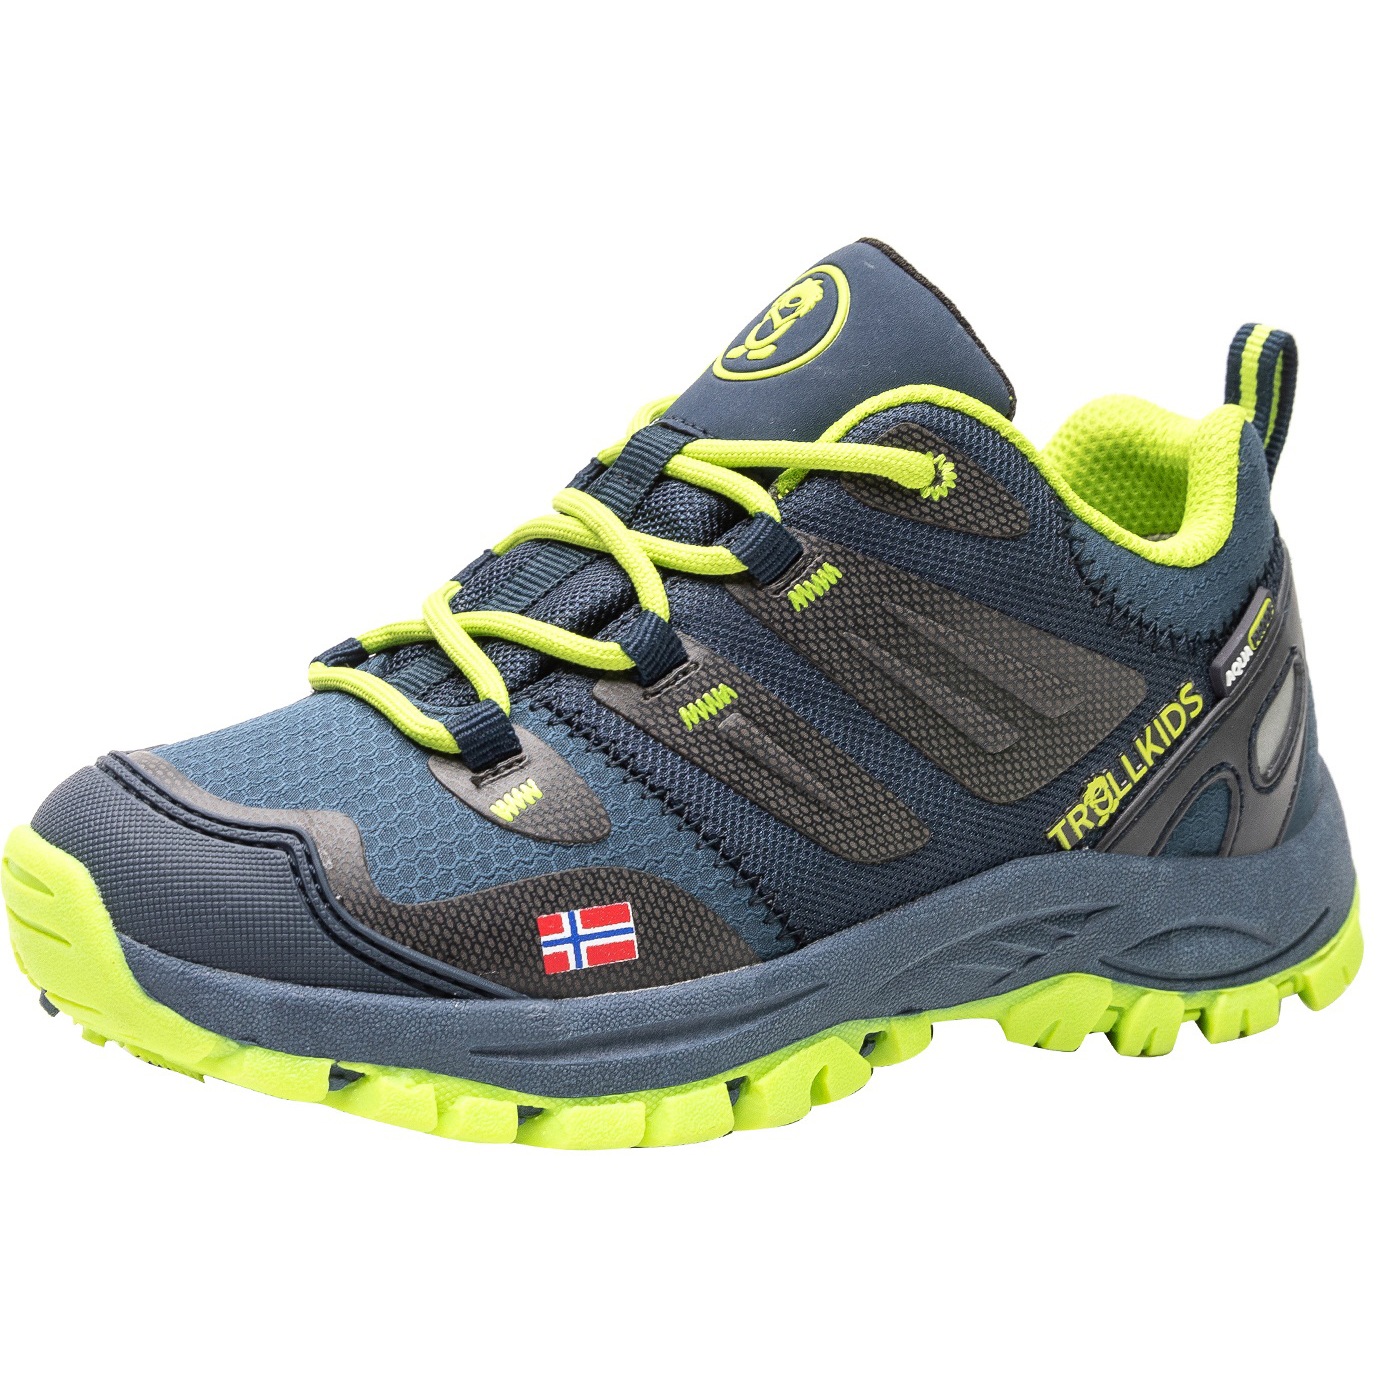 Picture of Trollkids Rondane Low Kids Hiker Shoes - Navy/Lime